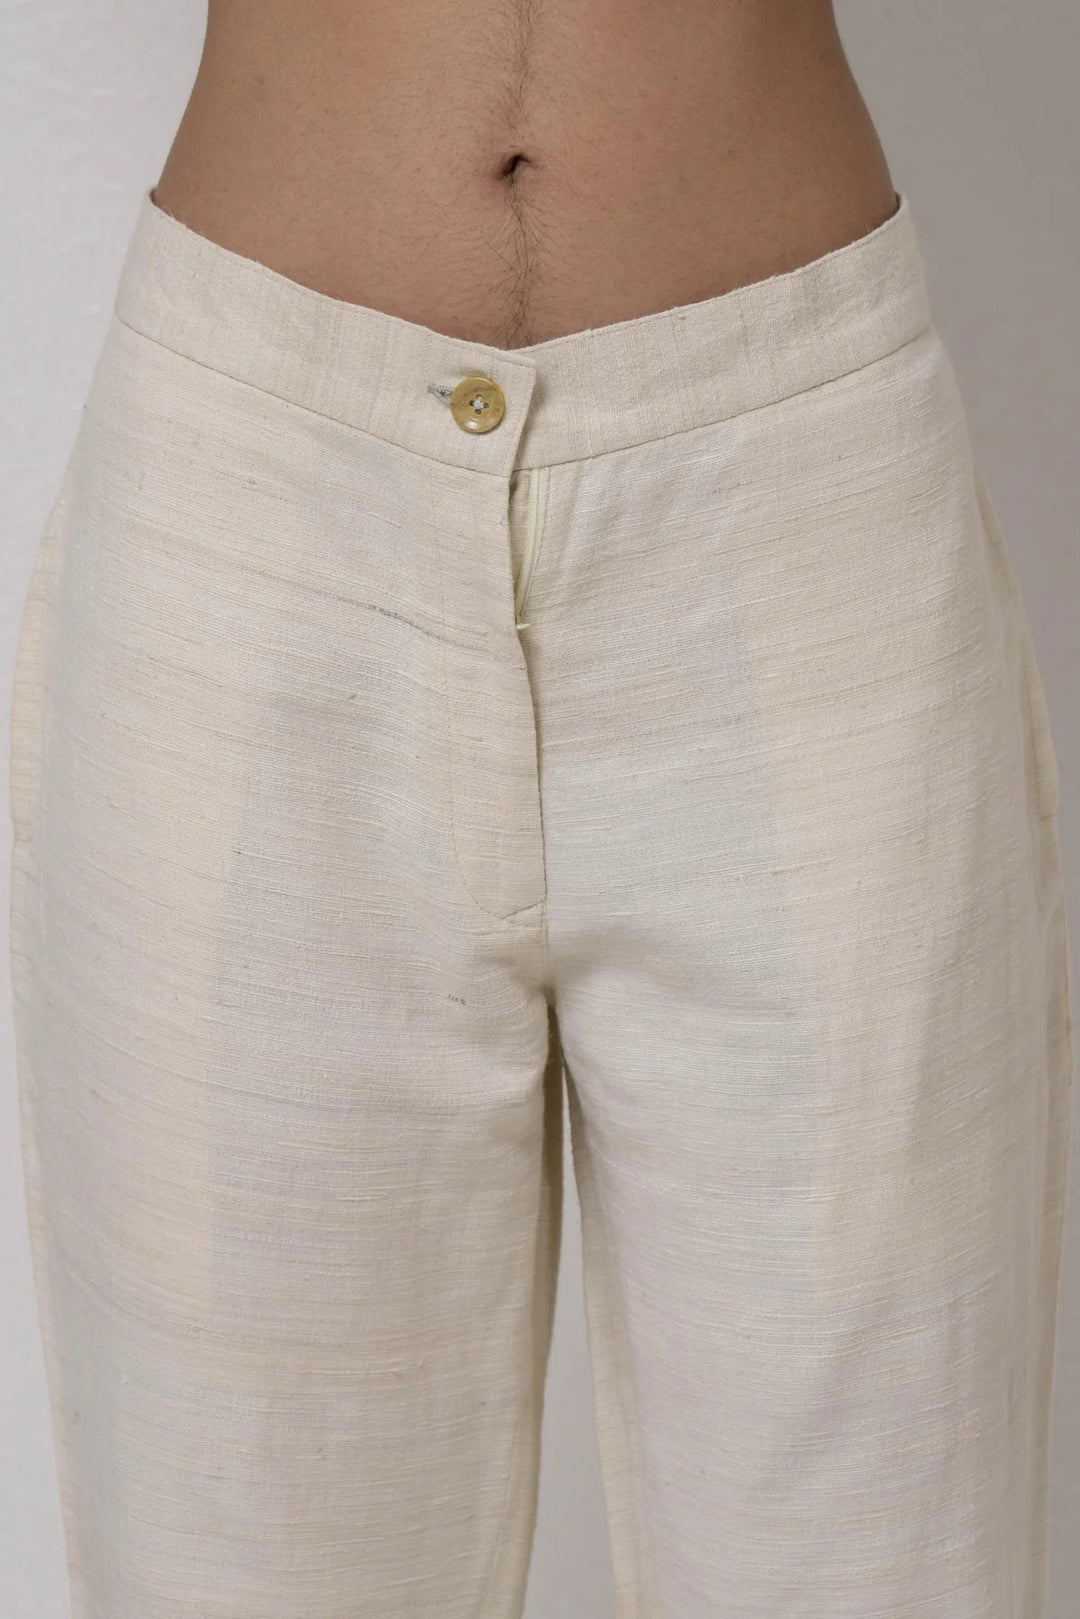 Handwoven Silk Trousers with Chic Design | Oishi Handwoven Trousers - Cream